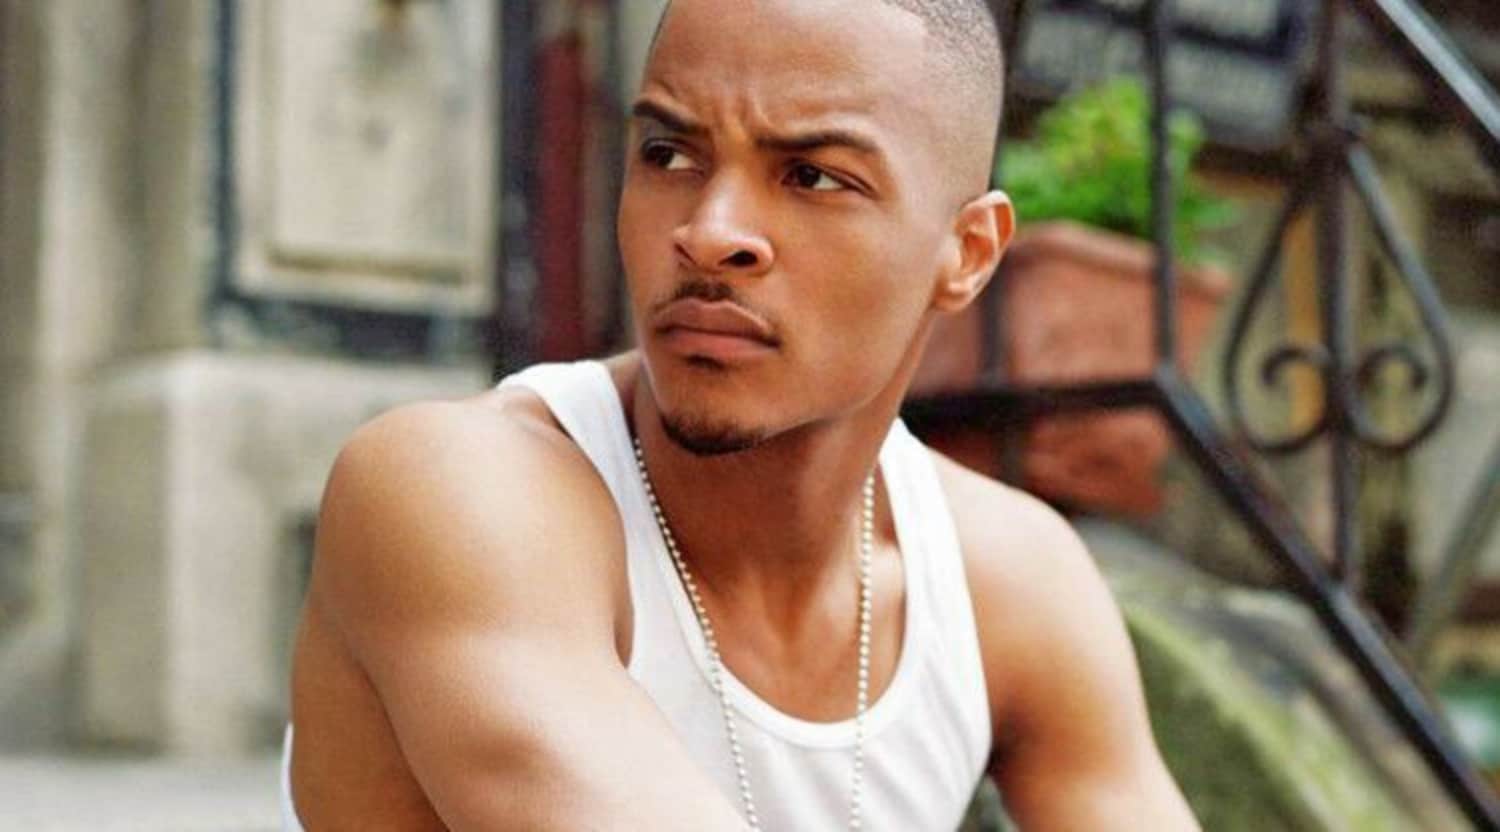 T.I. Lets His Voice Be Heard On Social Media, But Some People Don't Agree With Him